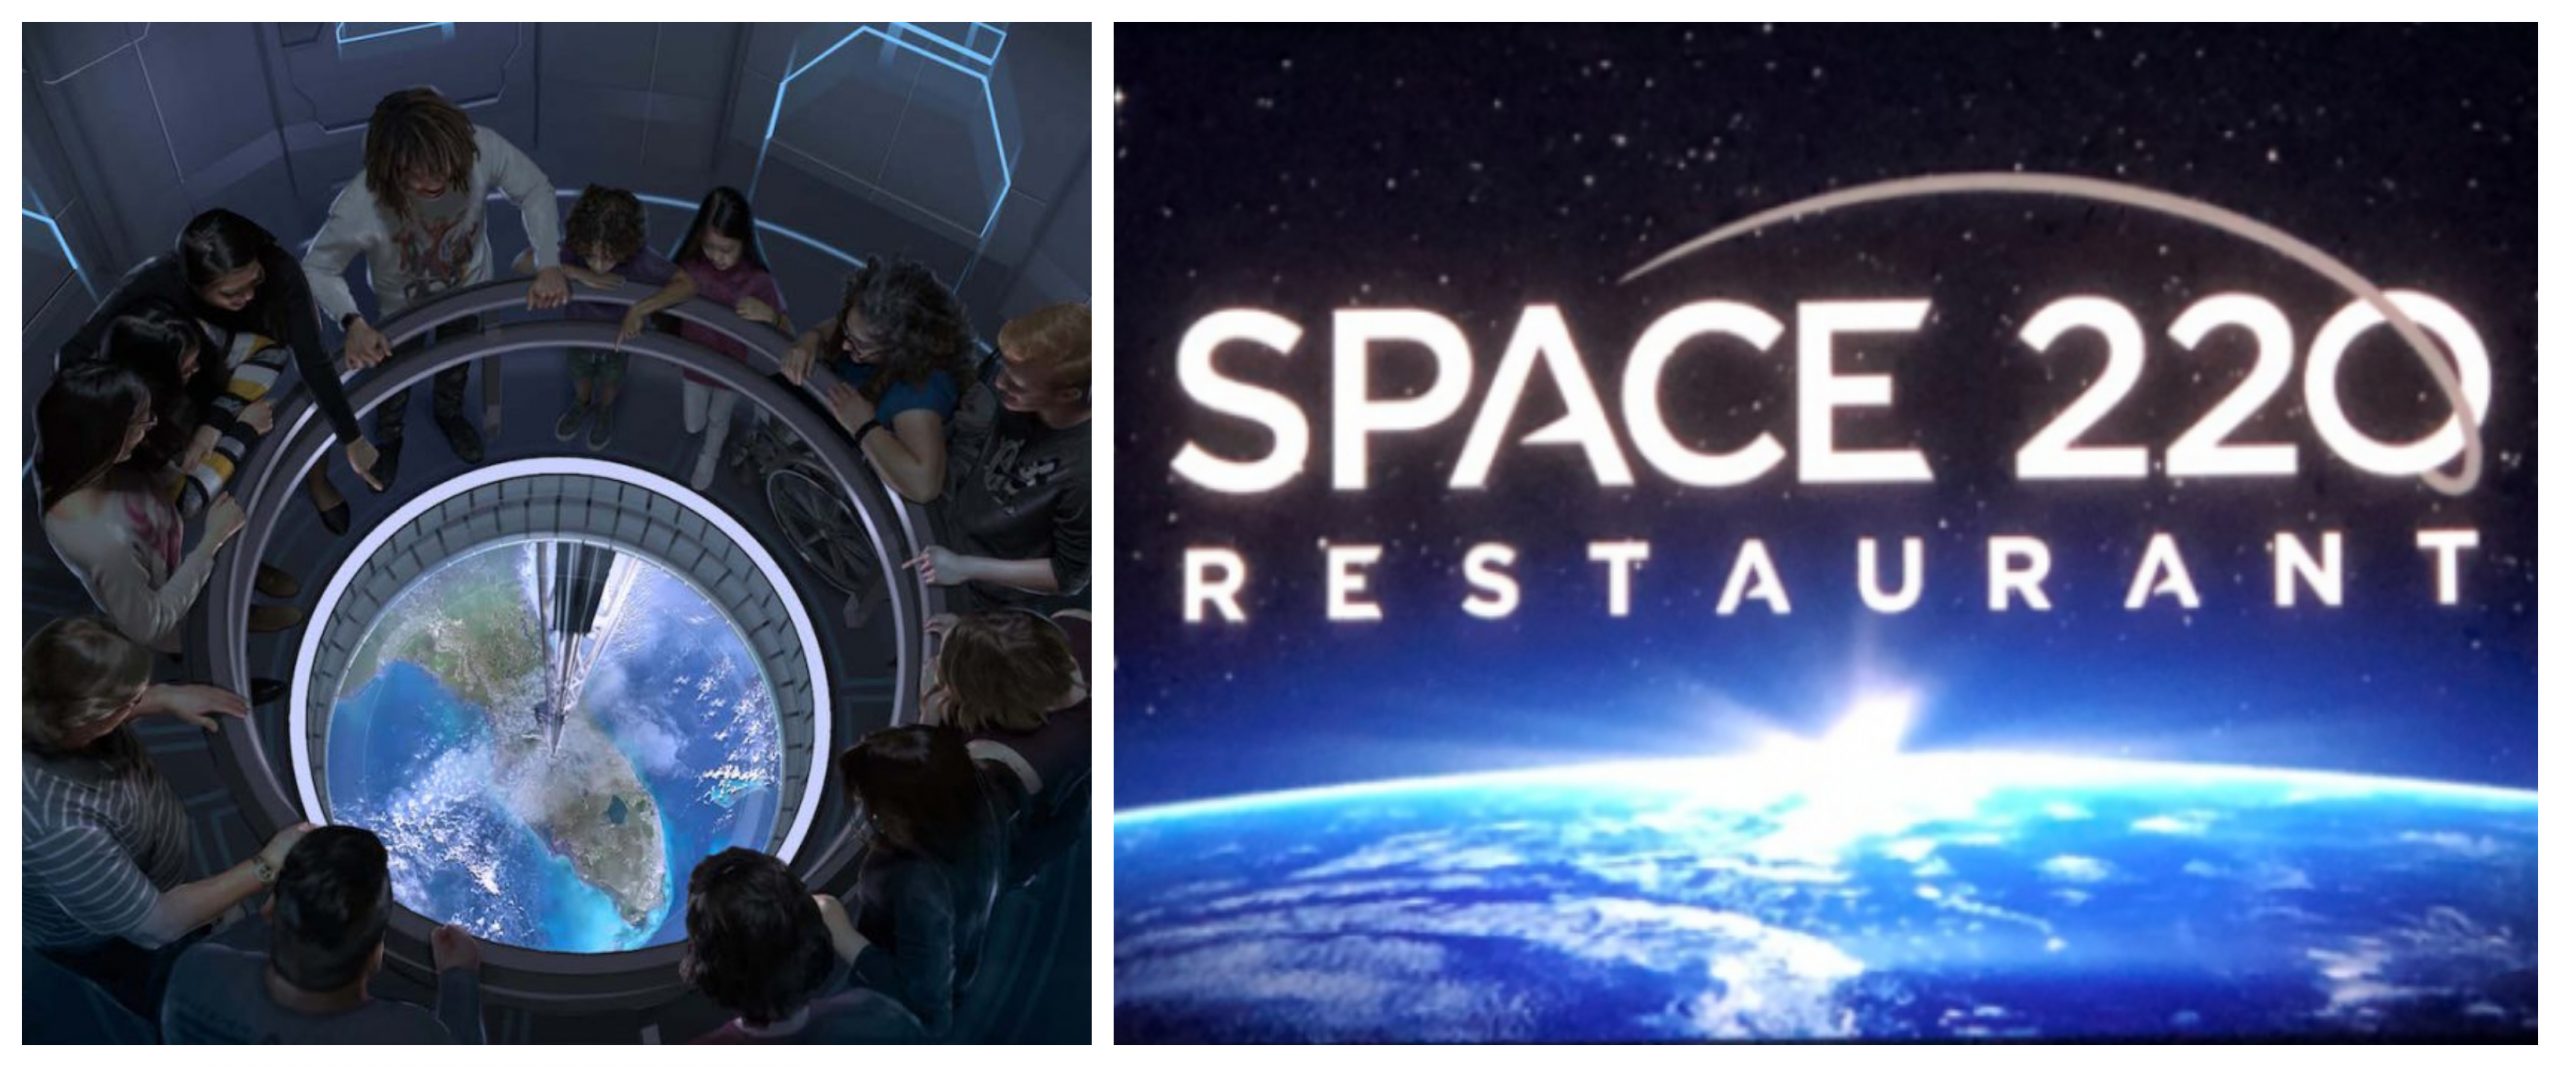 Space 220 Restaurant in Epcot Opening this March